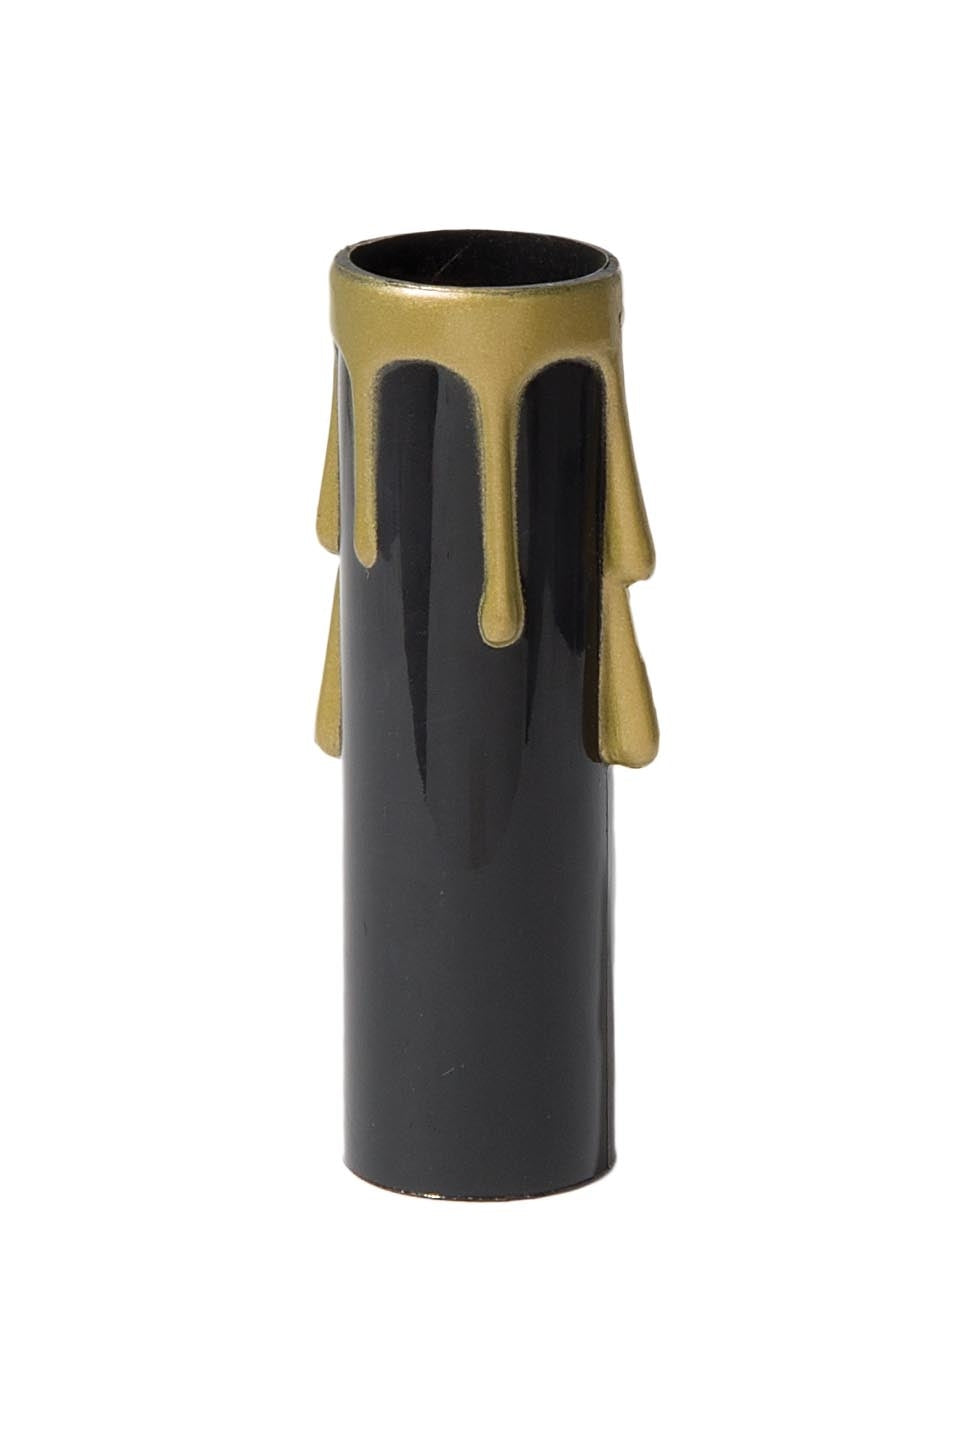 3 Inch Tall Black Colored Plastic Candelabra Sized Candle Cover with Gold Drips